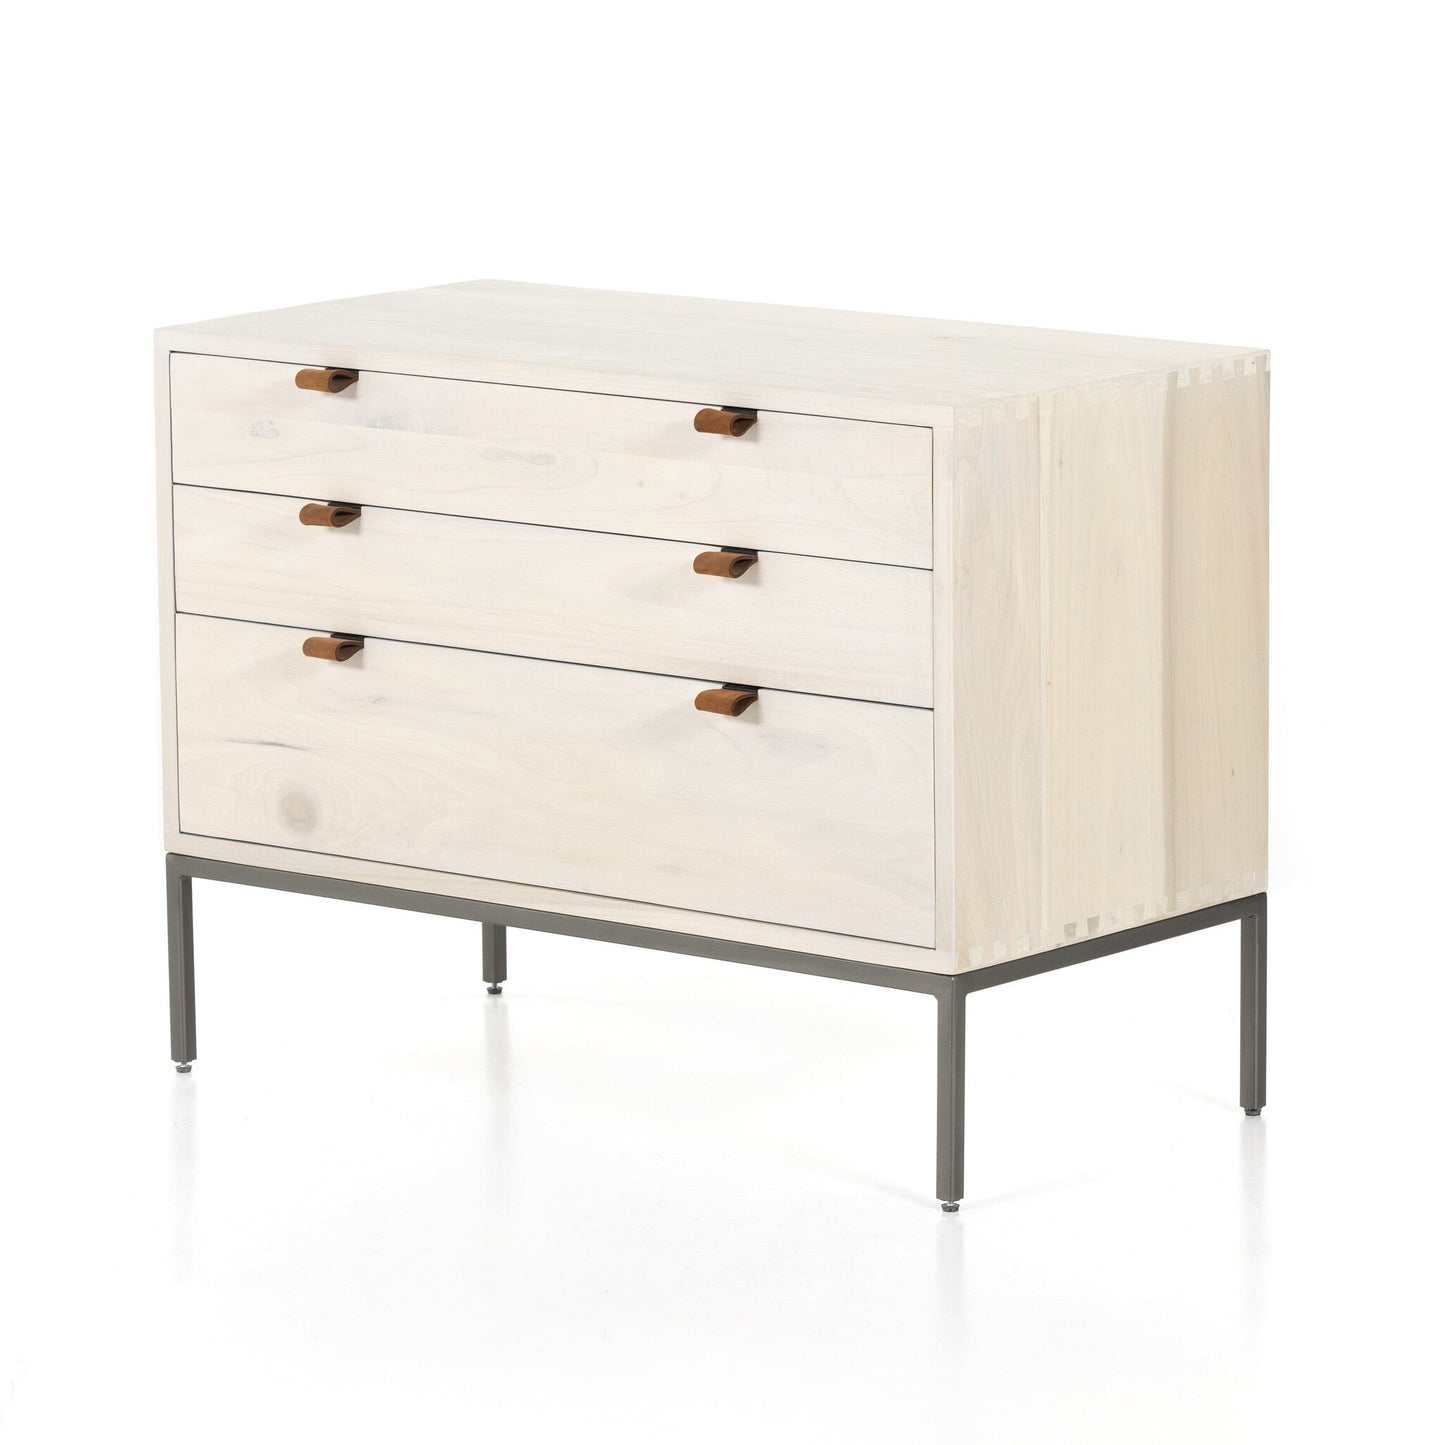 Trey Large Nightstand - Natural